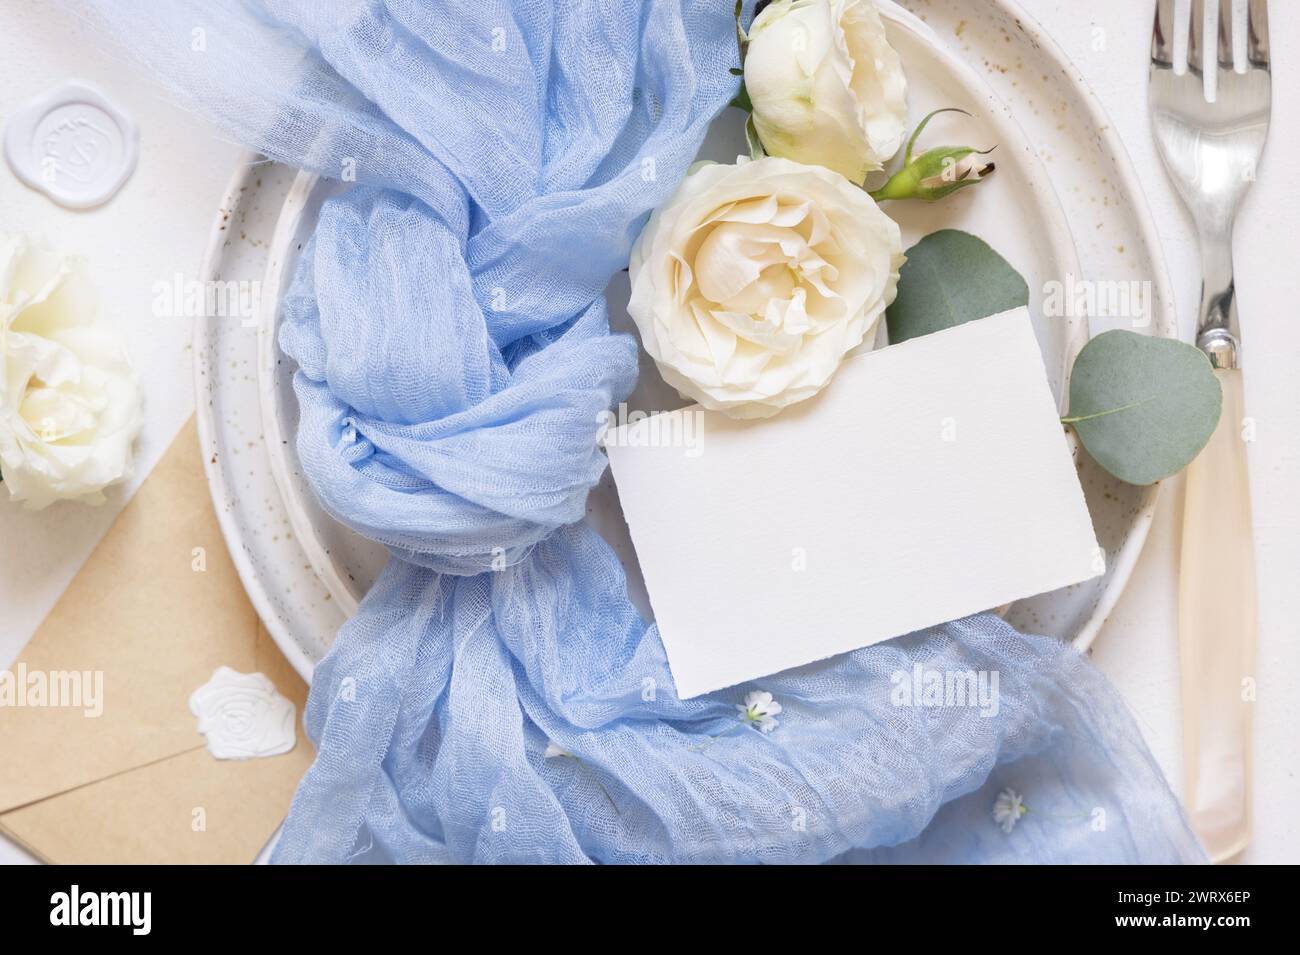 Blank card near light blue tulle fabric and cream roses on plates top view, copy space. Wedding stationery mockup. Romantic table place with horizonta Stock Photo